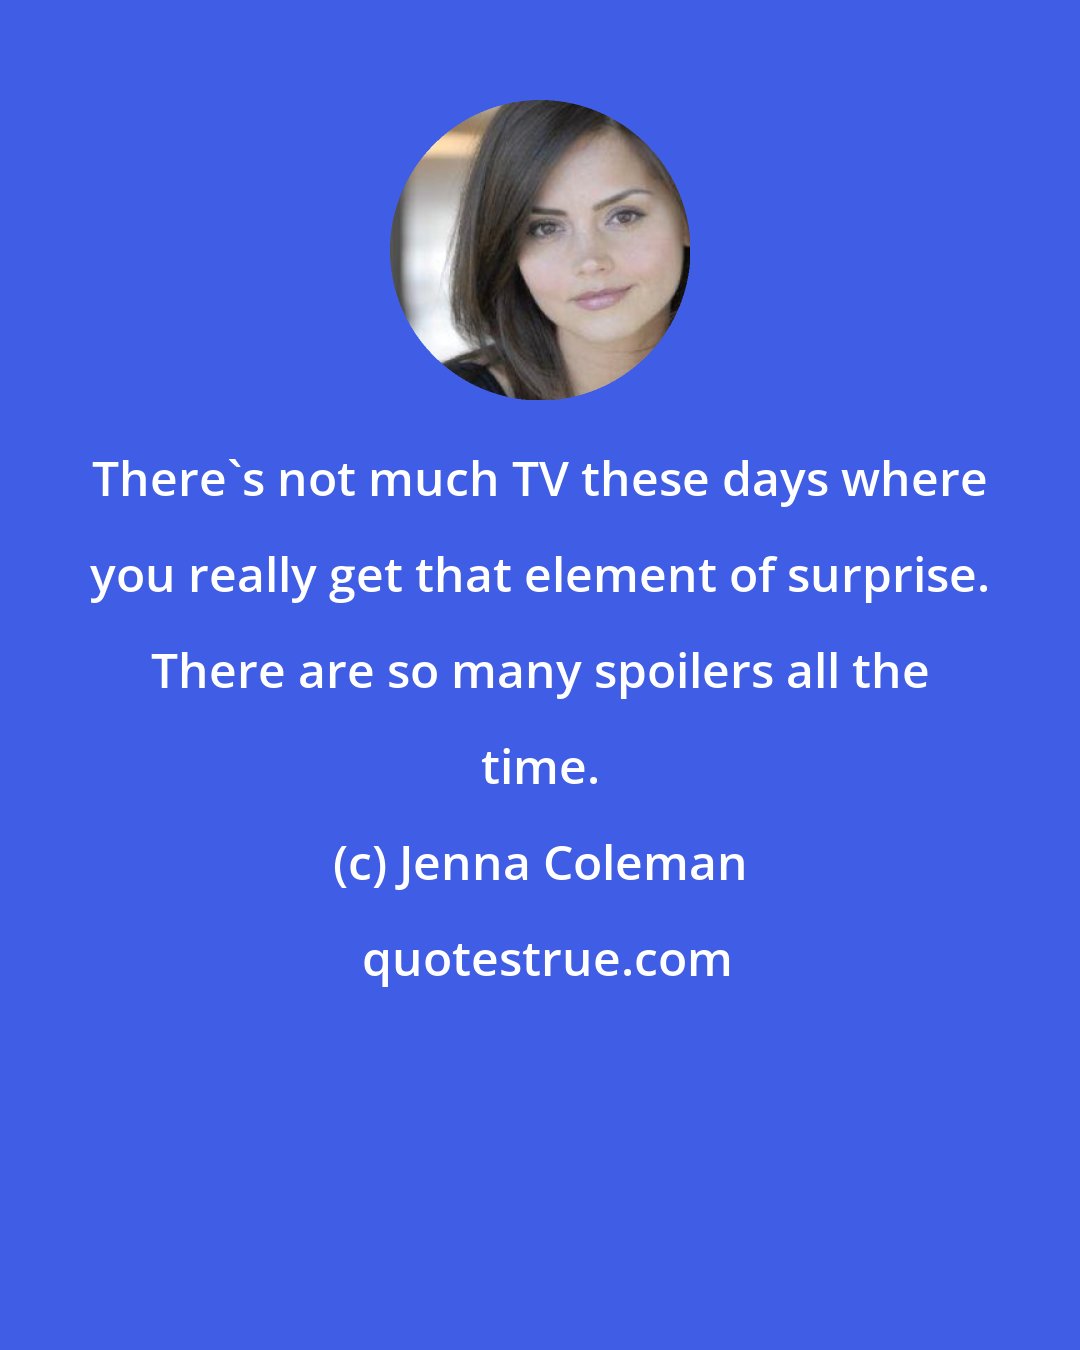 Jenna Coleman: There's not much TV these days where you really get that element of surprise. There are so many spoilers all the time.